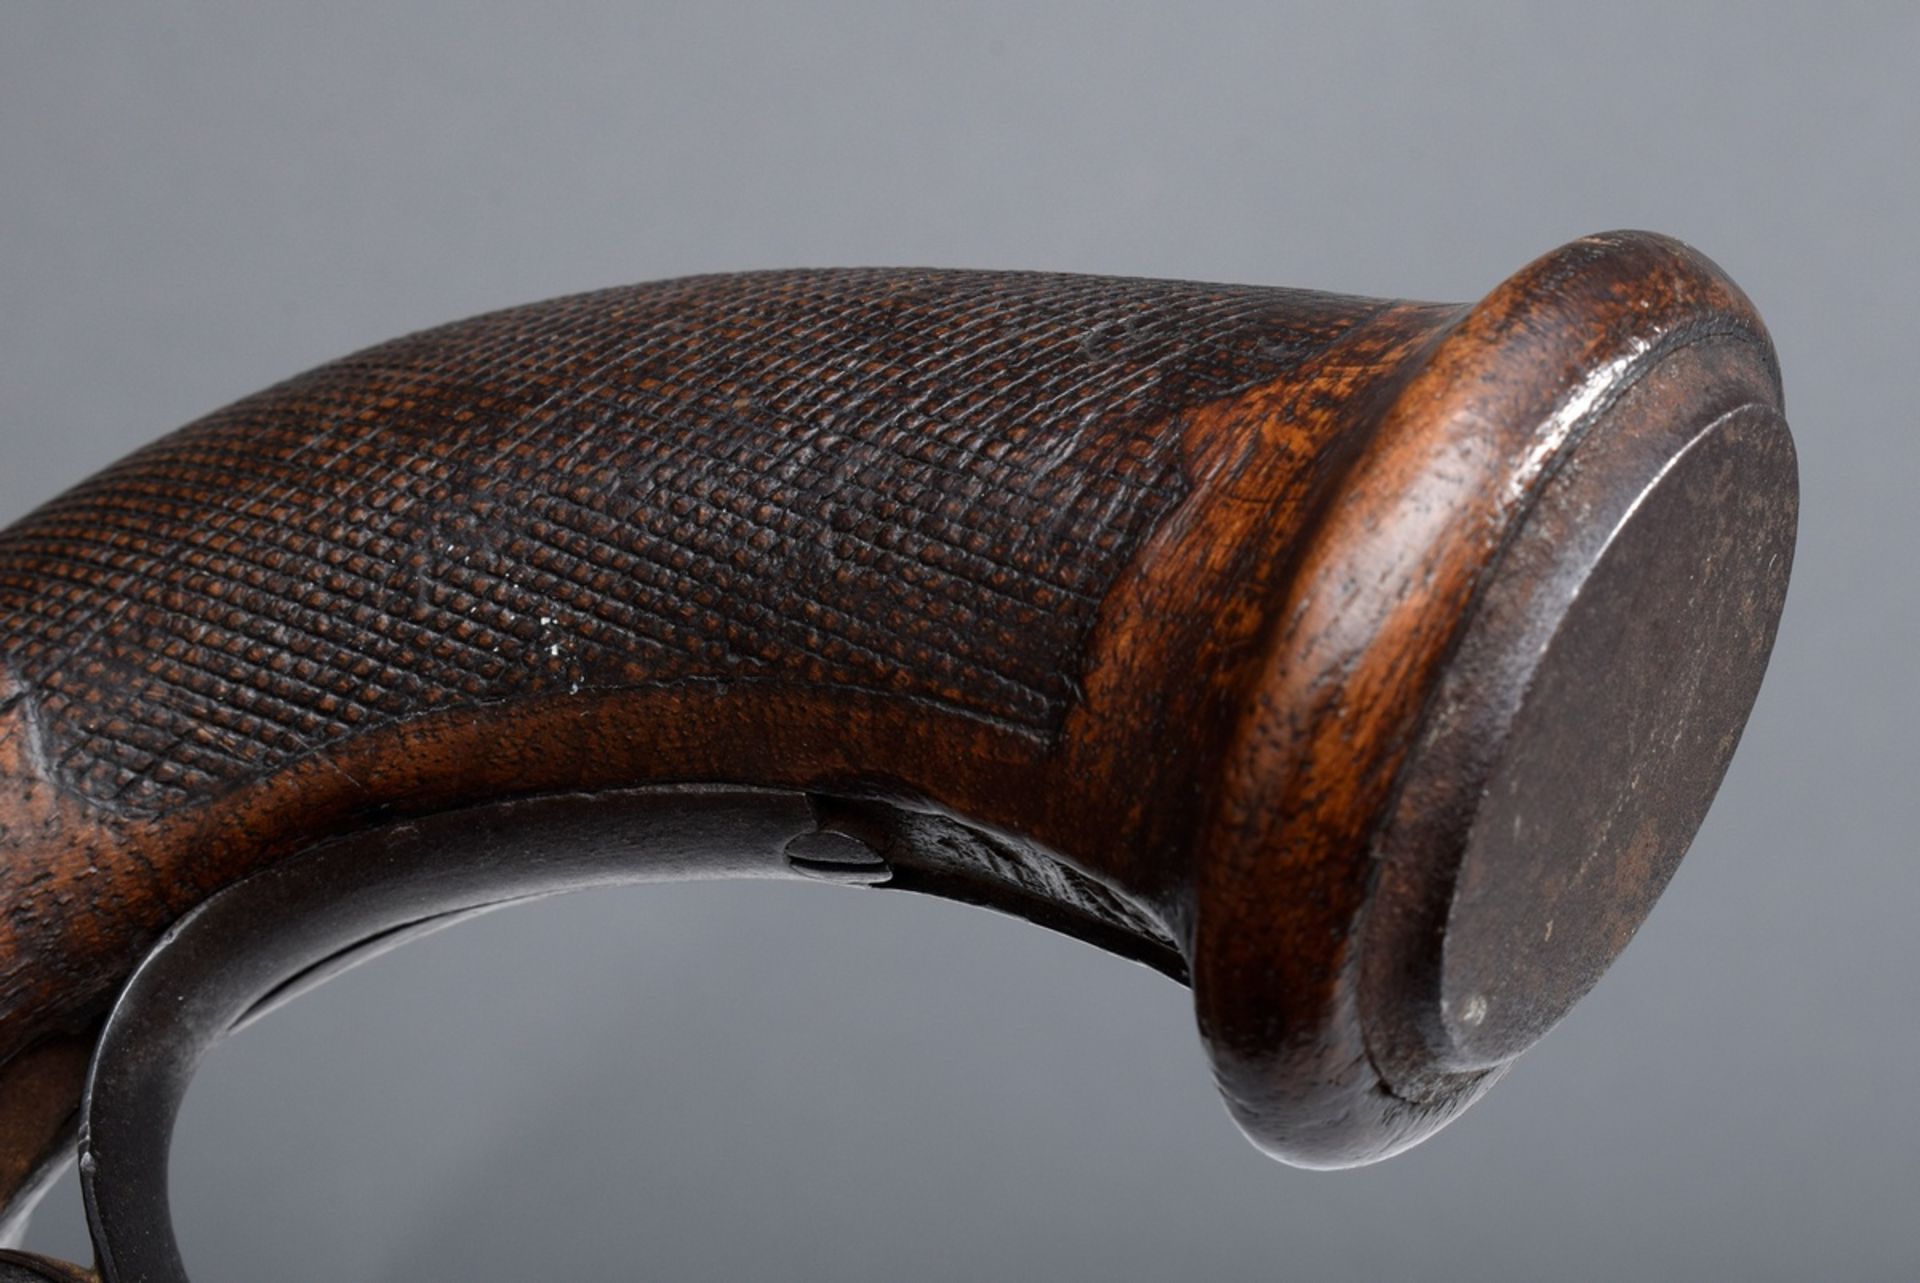 Antike Vorderladerpistole mit Percussionsschloss | Antique muzzle-loading pistol with percussion lo - Image 7 of 11